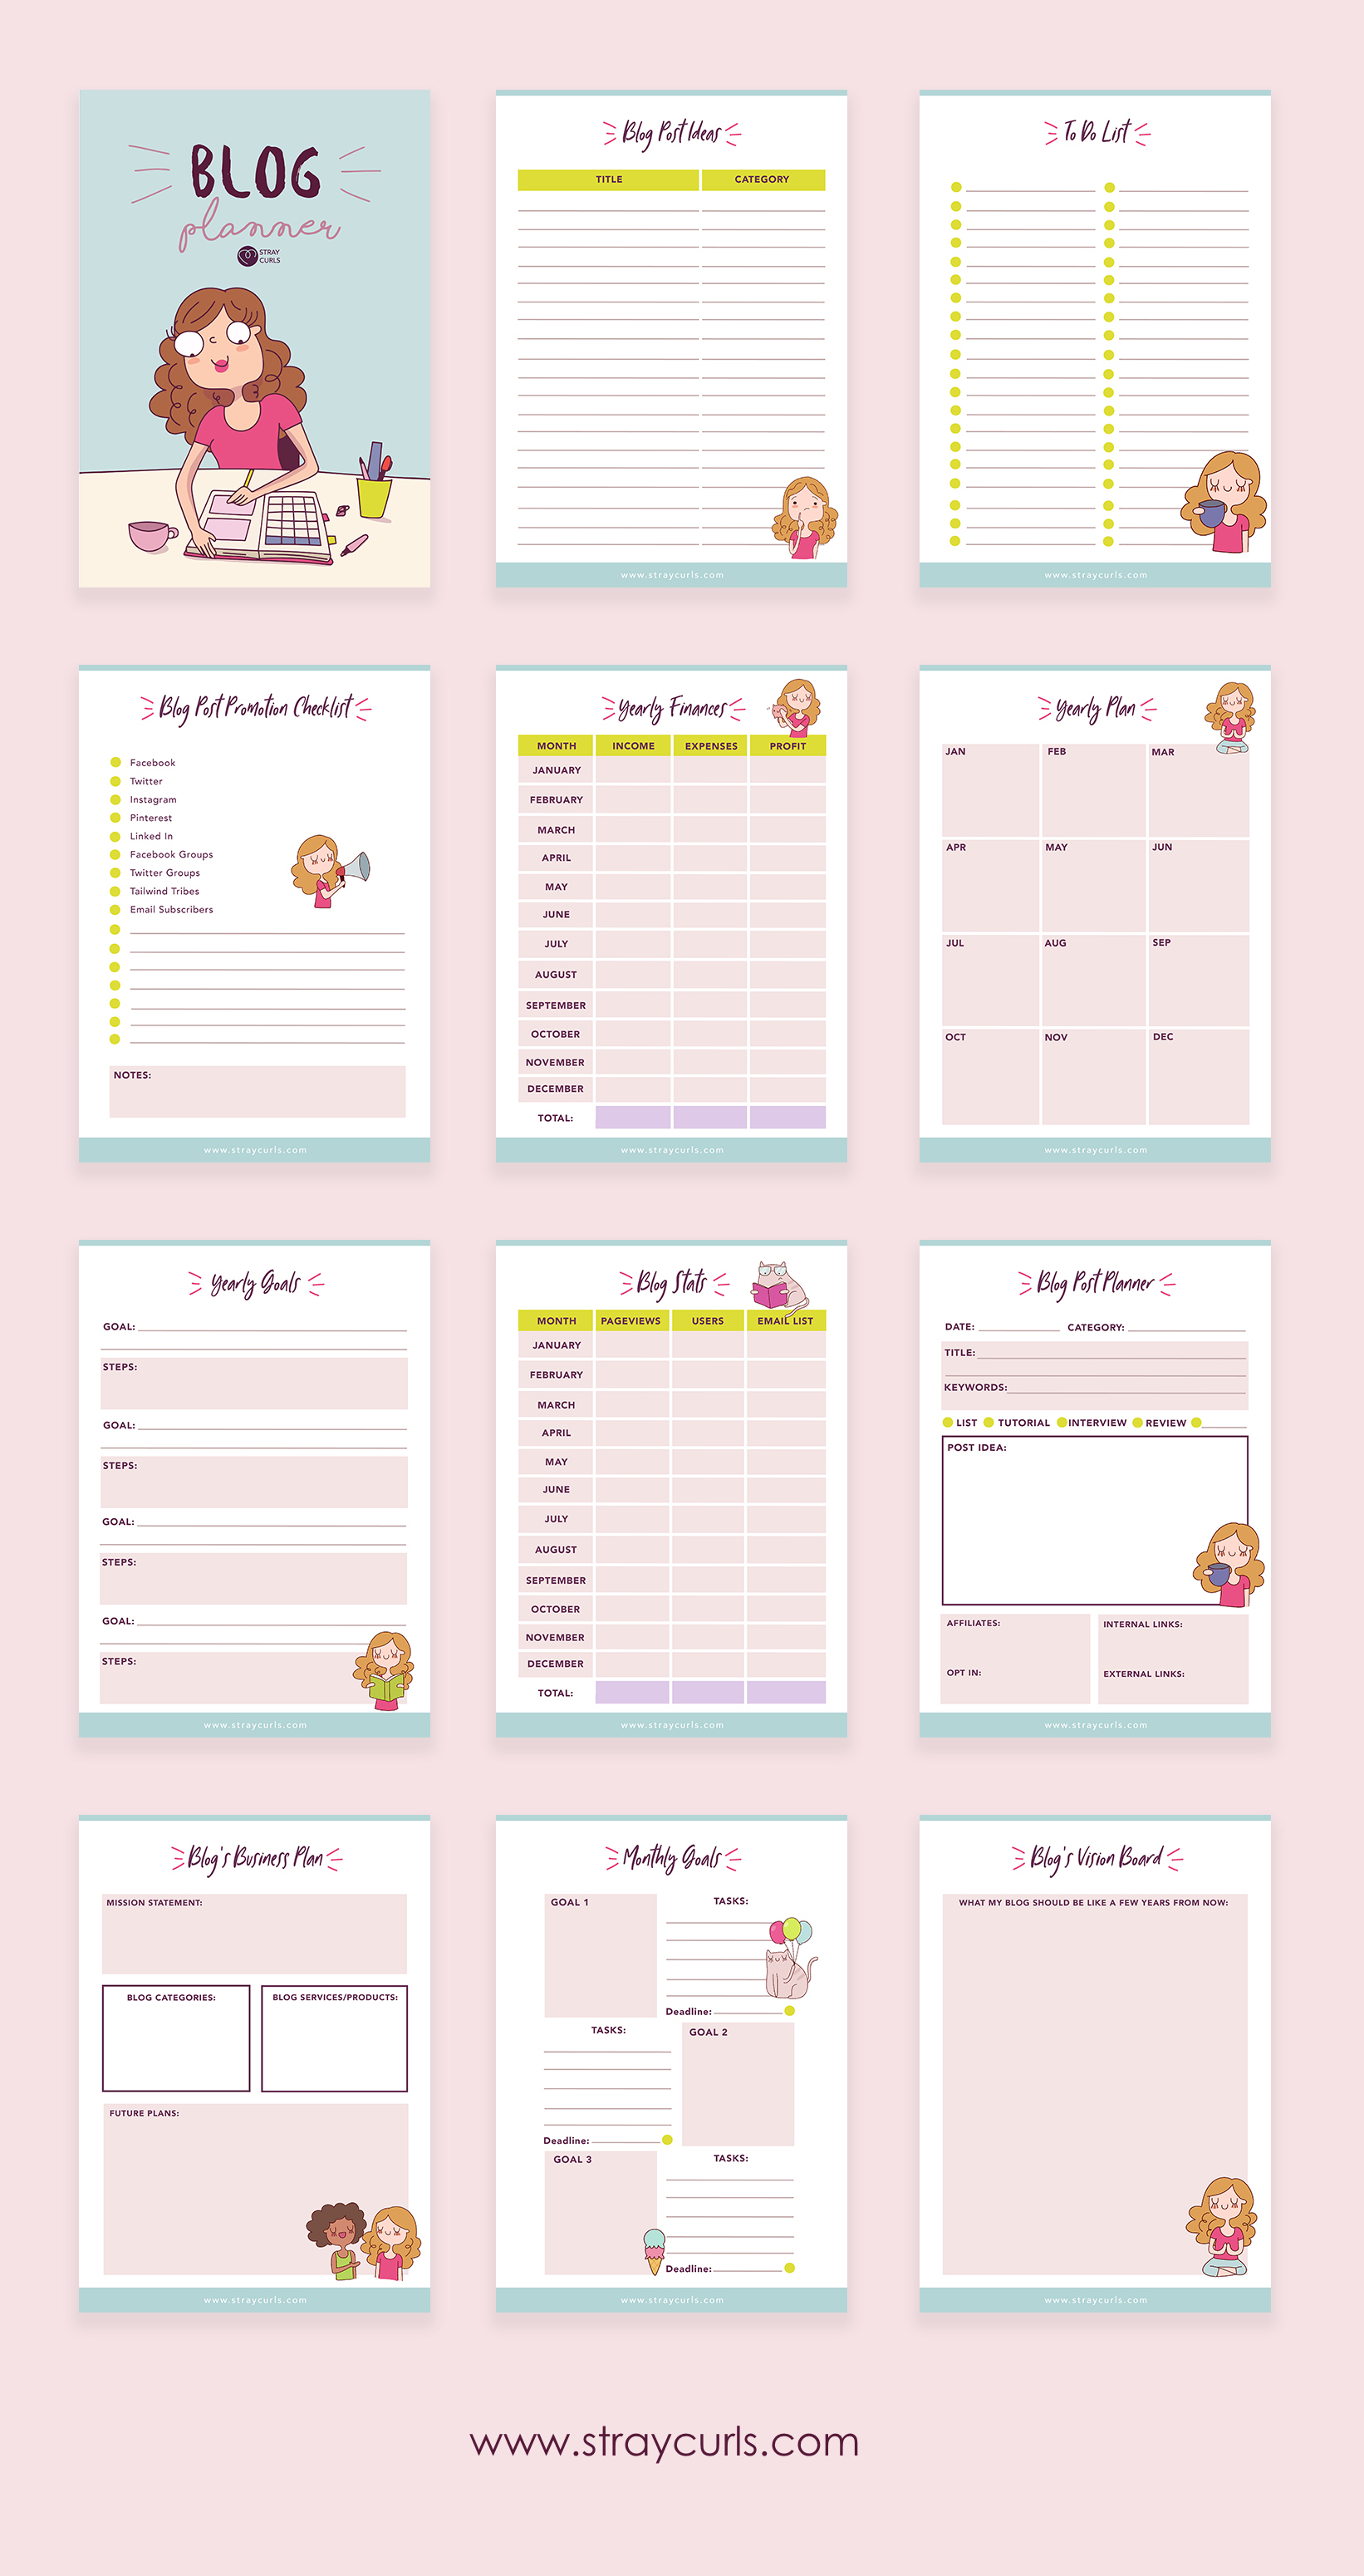 Free Download: 12 Page 2019 Blog Planner - Stray Curls - Free Printable Blog Planner